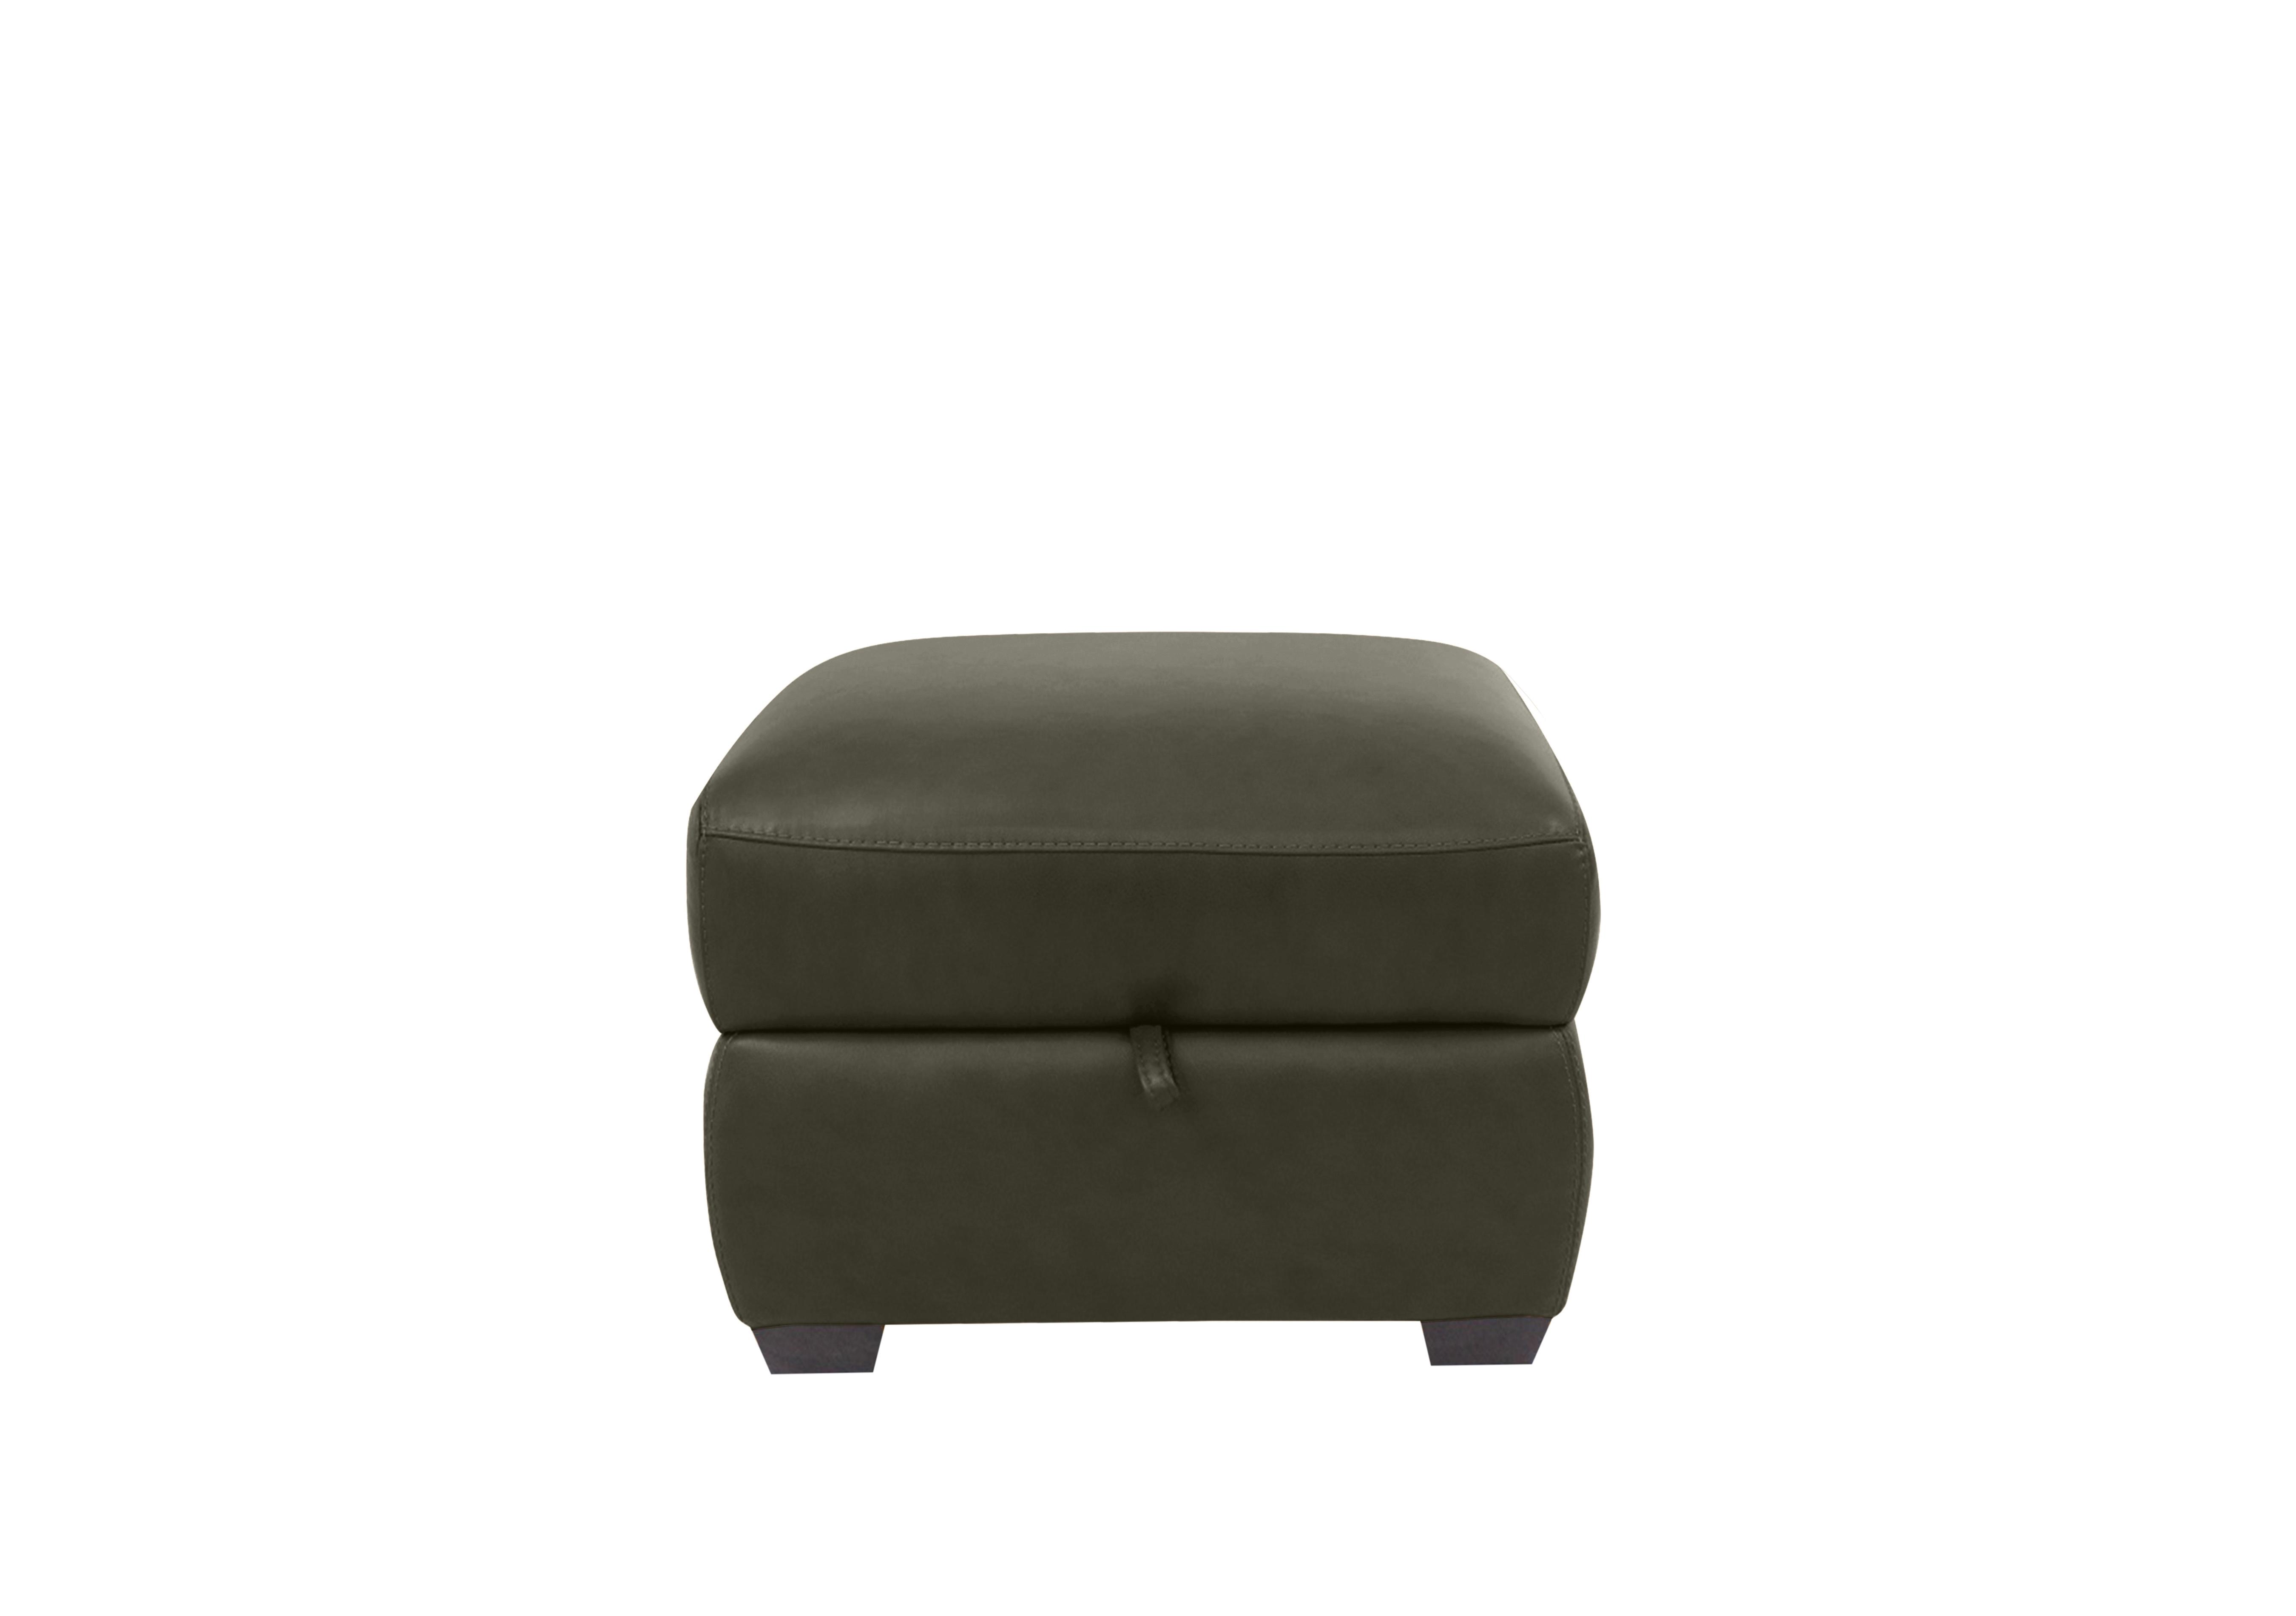 Cozee Leather Storage Stool in Nw-548e Olive on Furniture Village